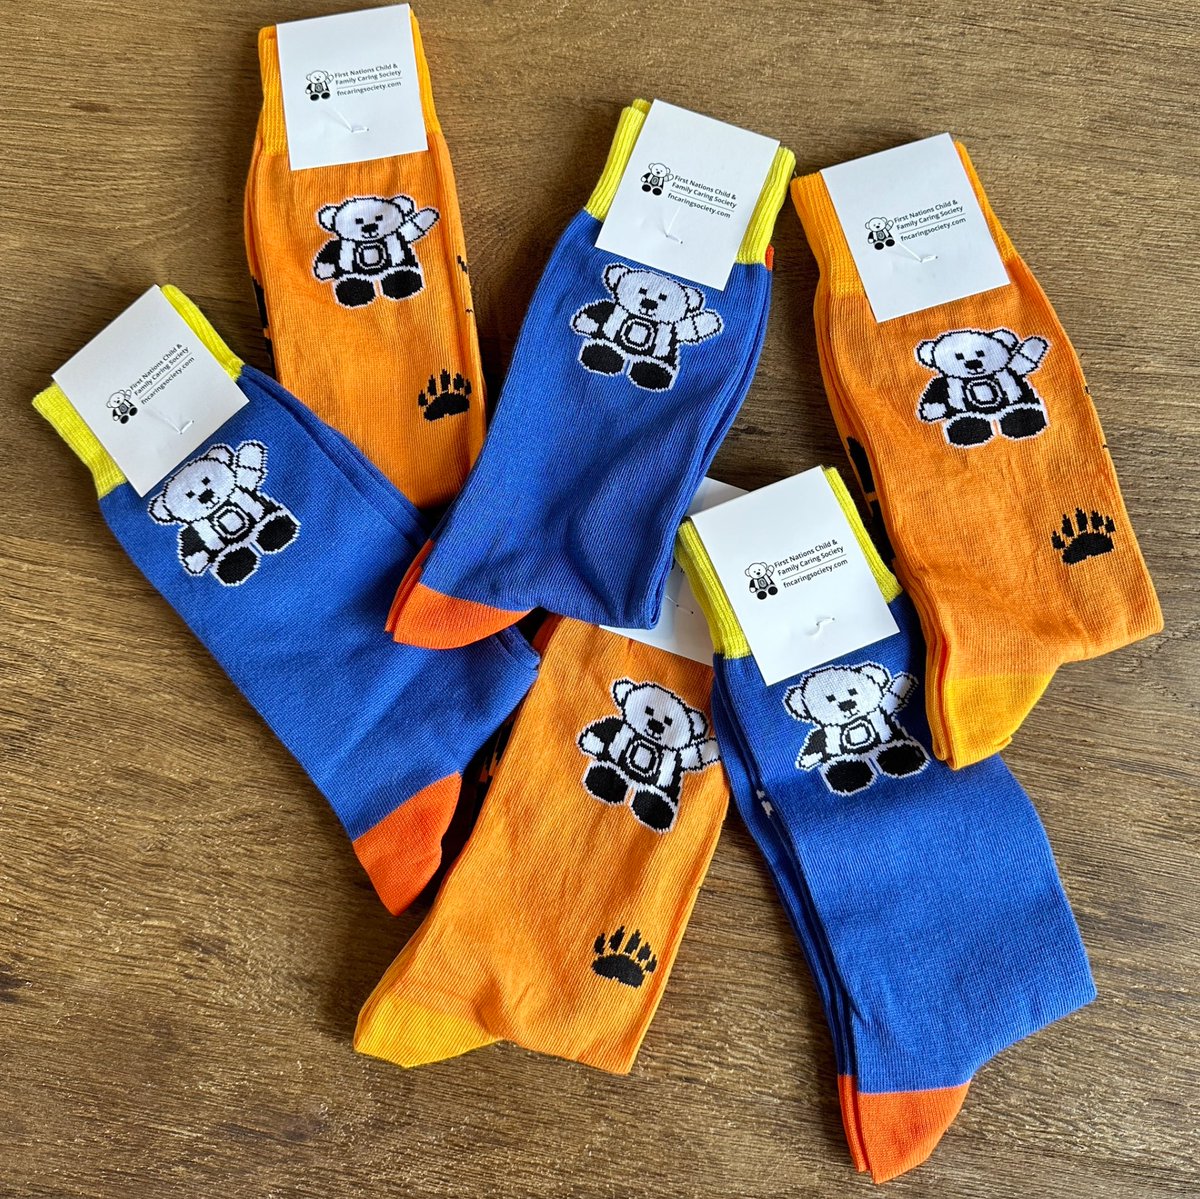 We still have Spirit Bear socks for sale! Head over to our website to check them out! All proceeds go towards child and youth-led reconciliation-based events and initiatives. If you purchased a pair, tag us in posts showing off your Spirit Bear socks 🧦🧸